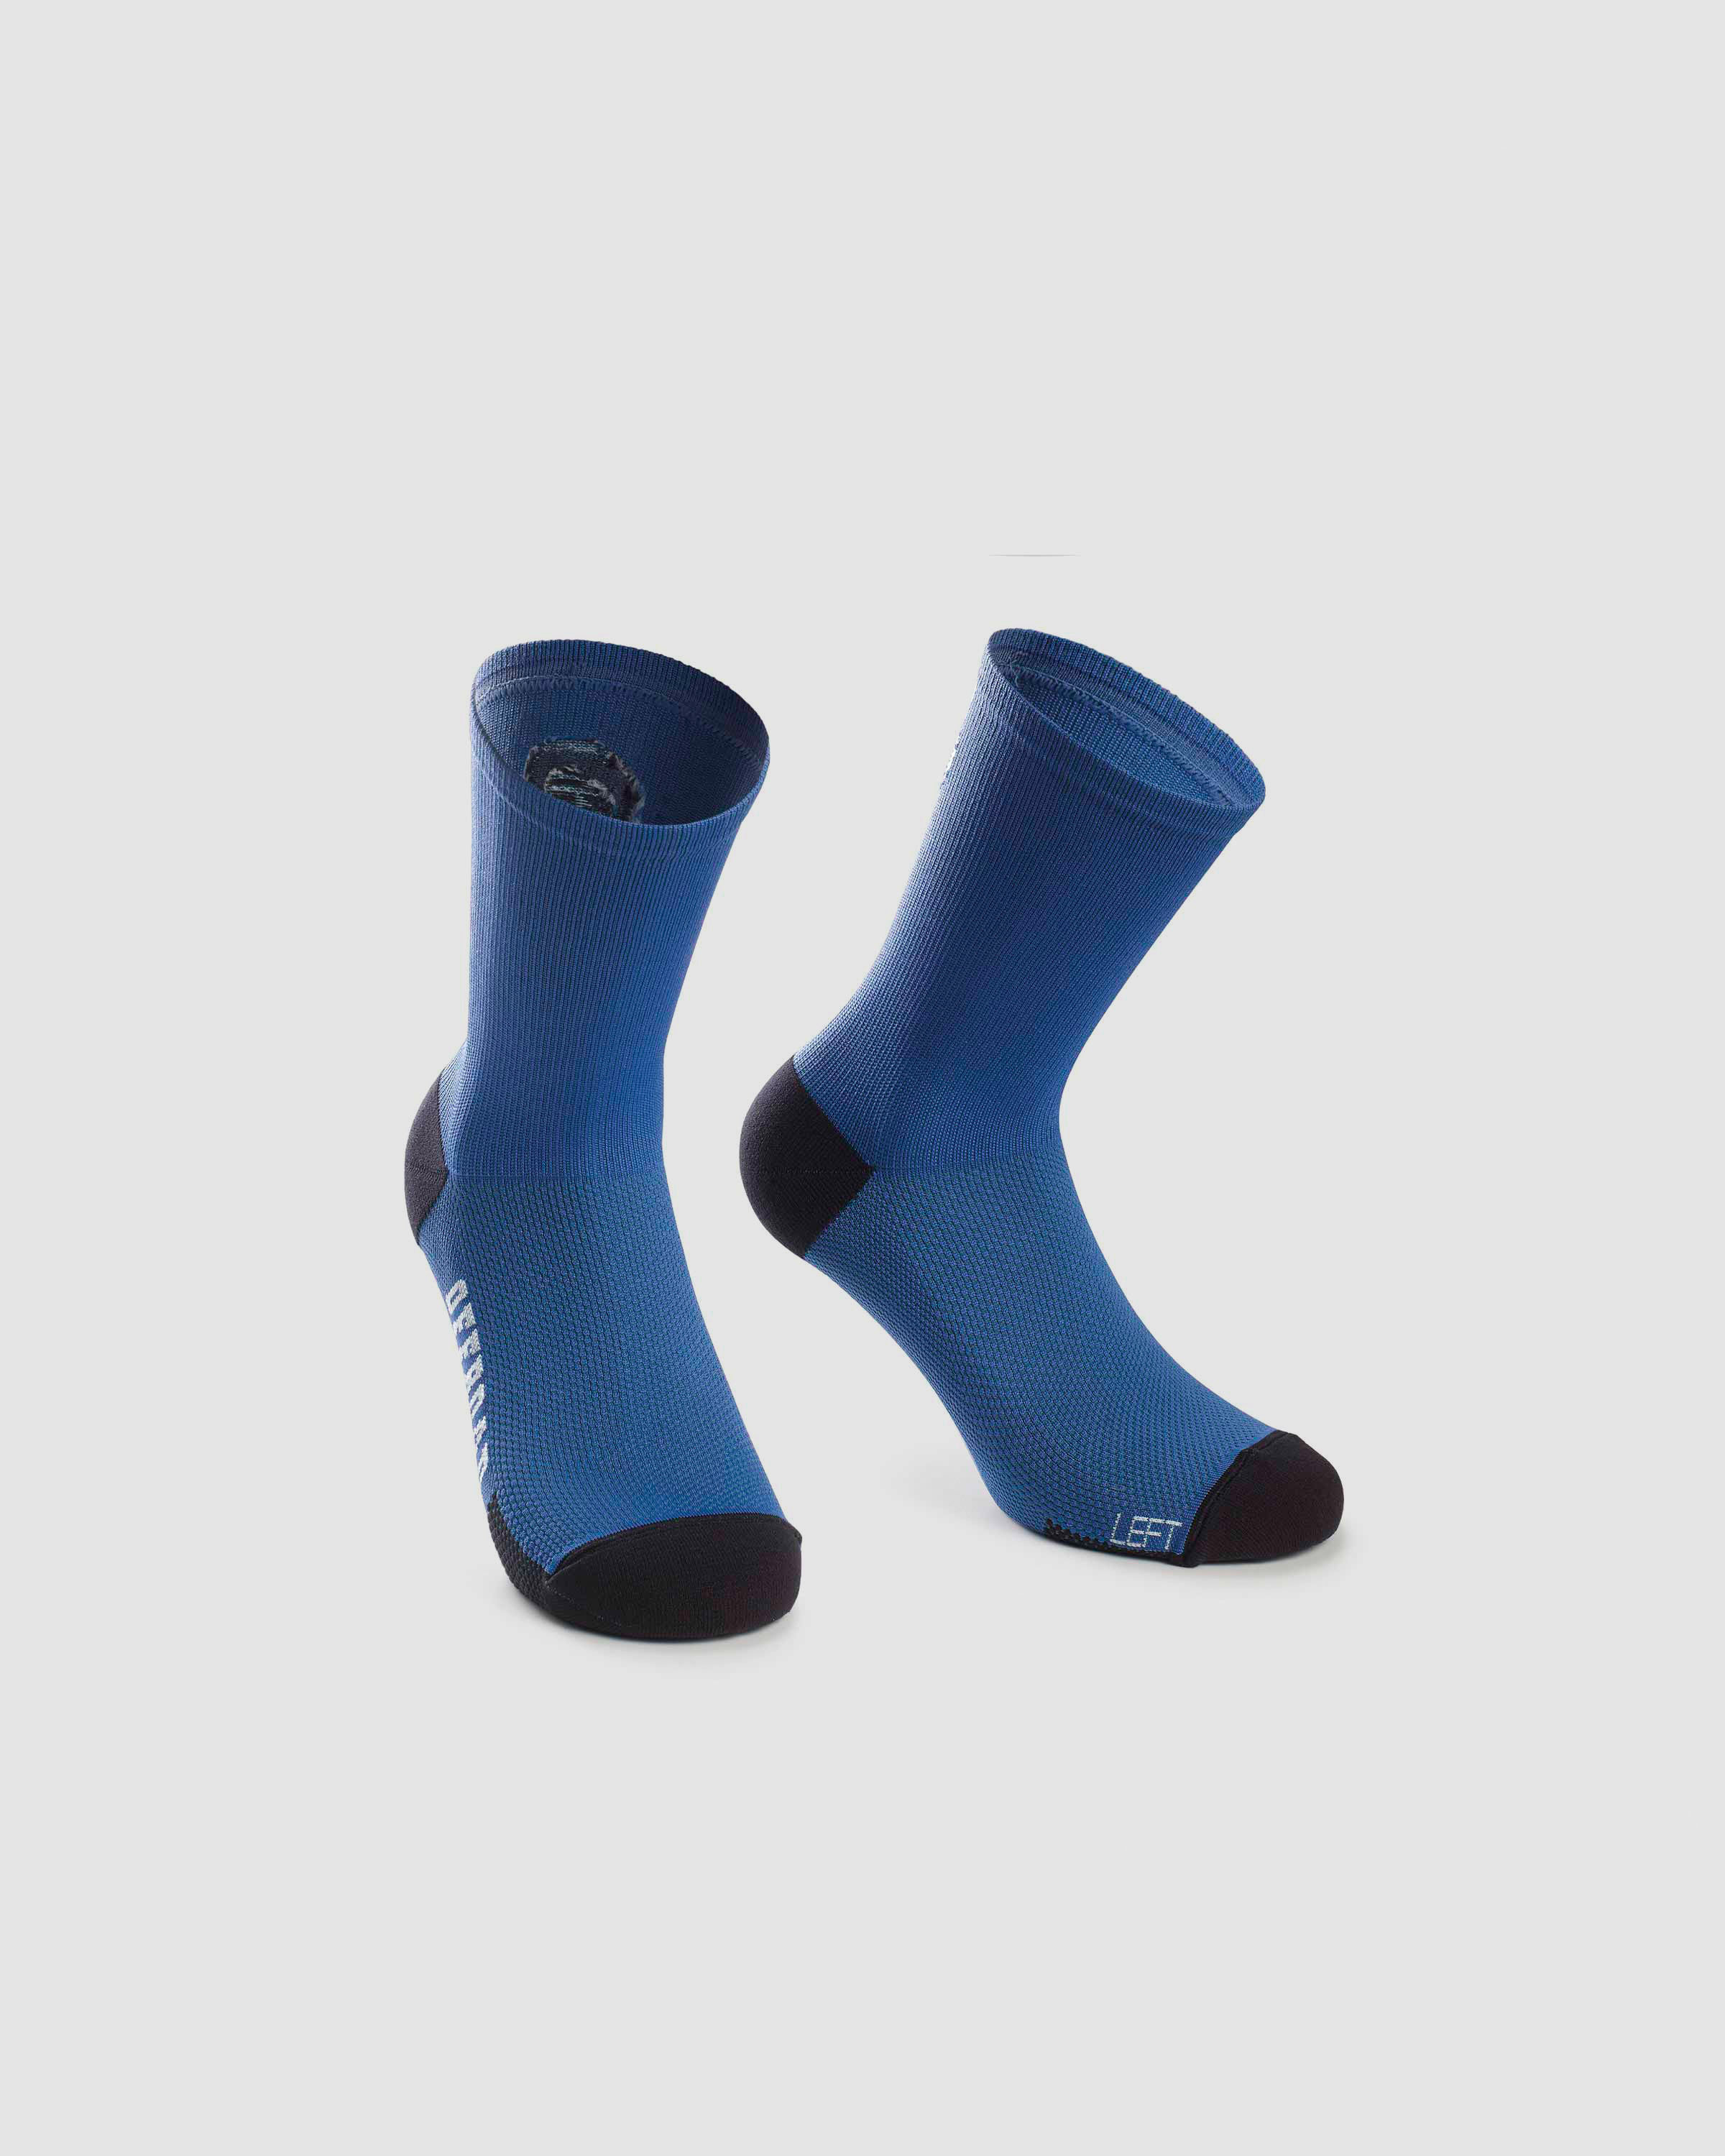 XC Socks - ASSOS Of Switzerland - Official Outlet